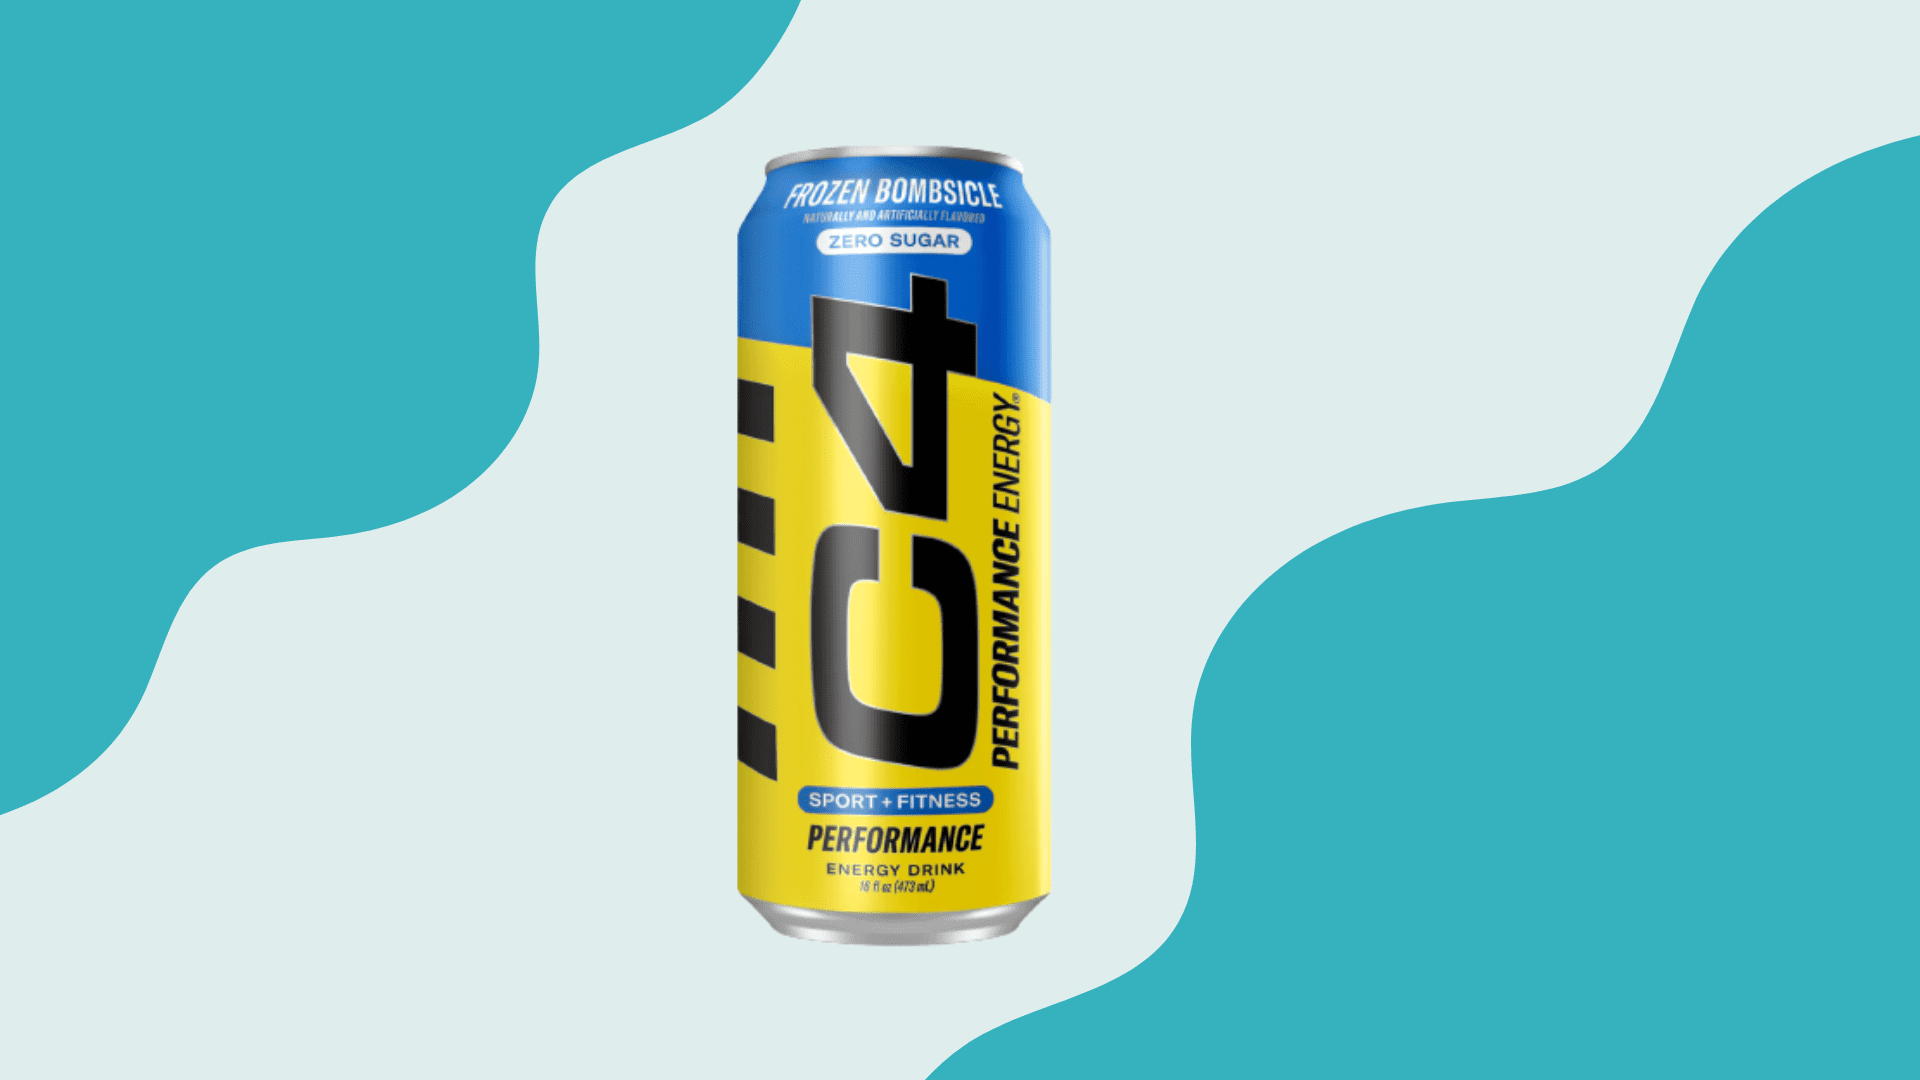 C4 energy drink can with frozen bombsicle flavor